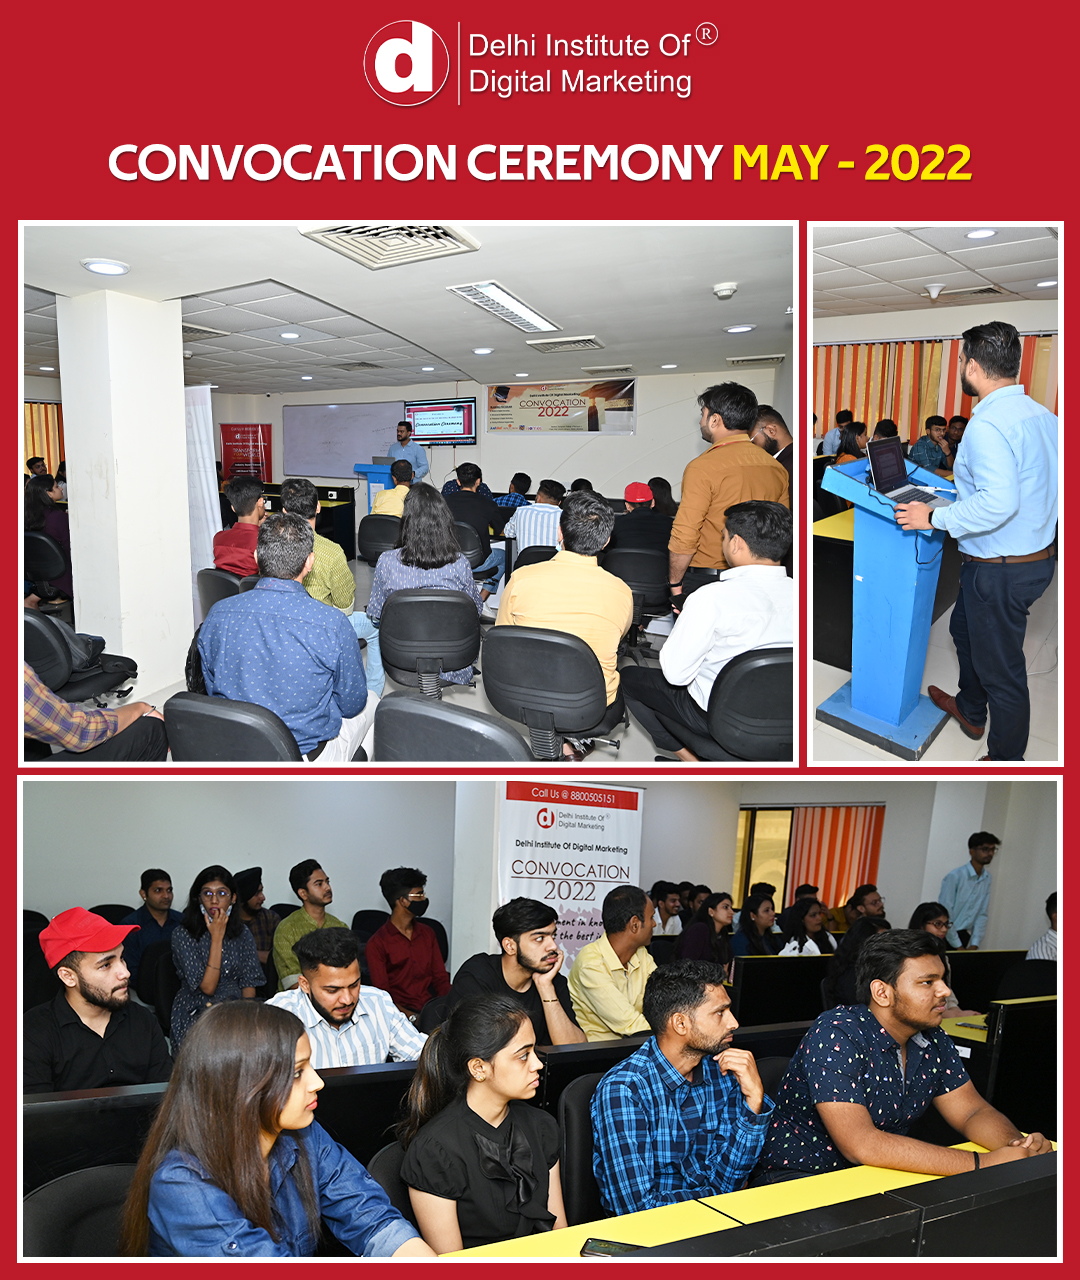 DIDM Convocation Ceremony May 22